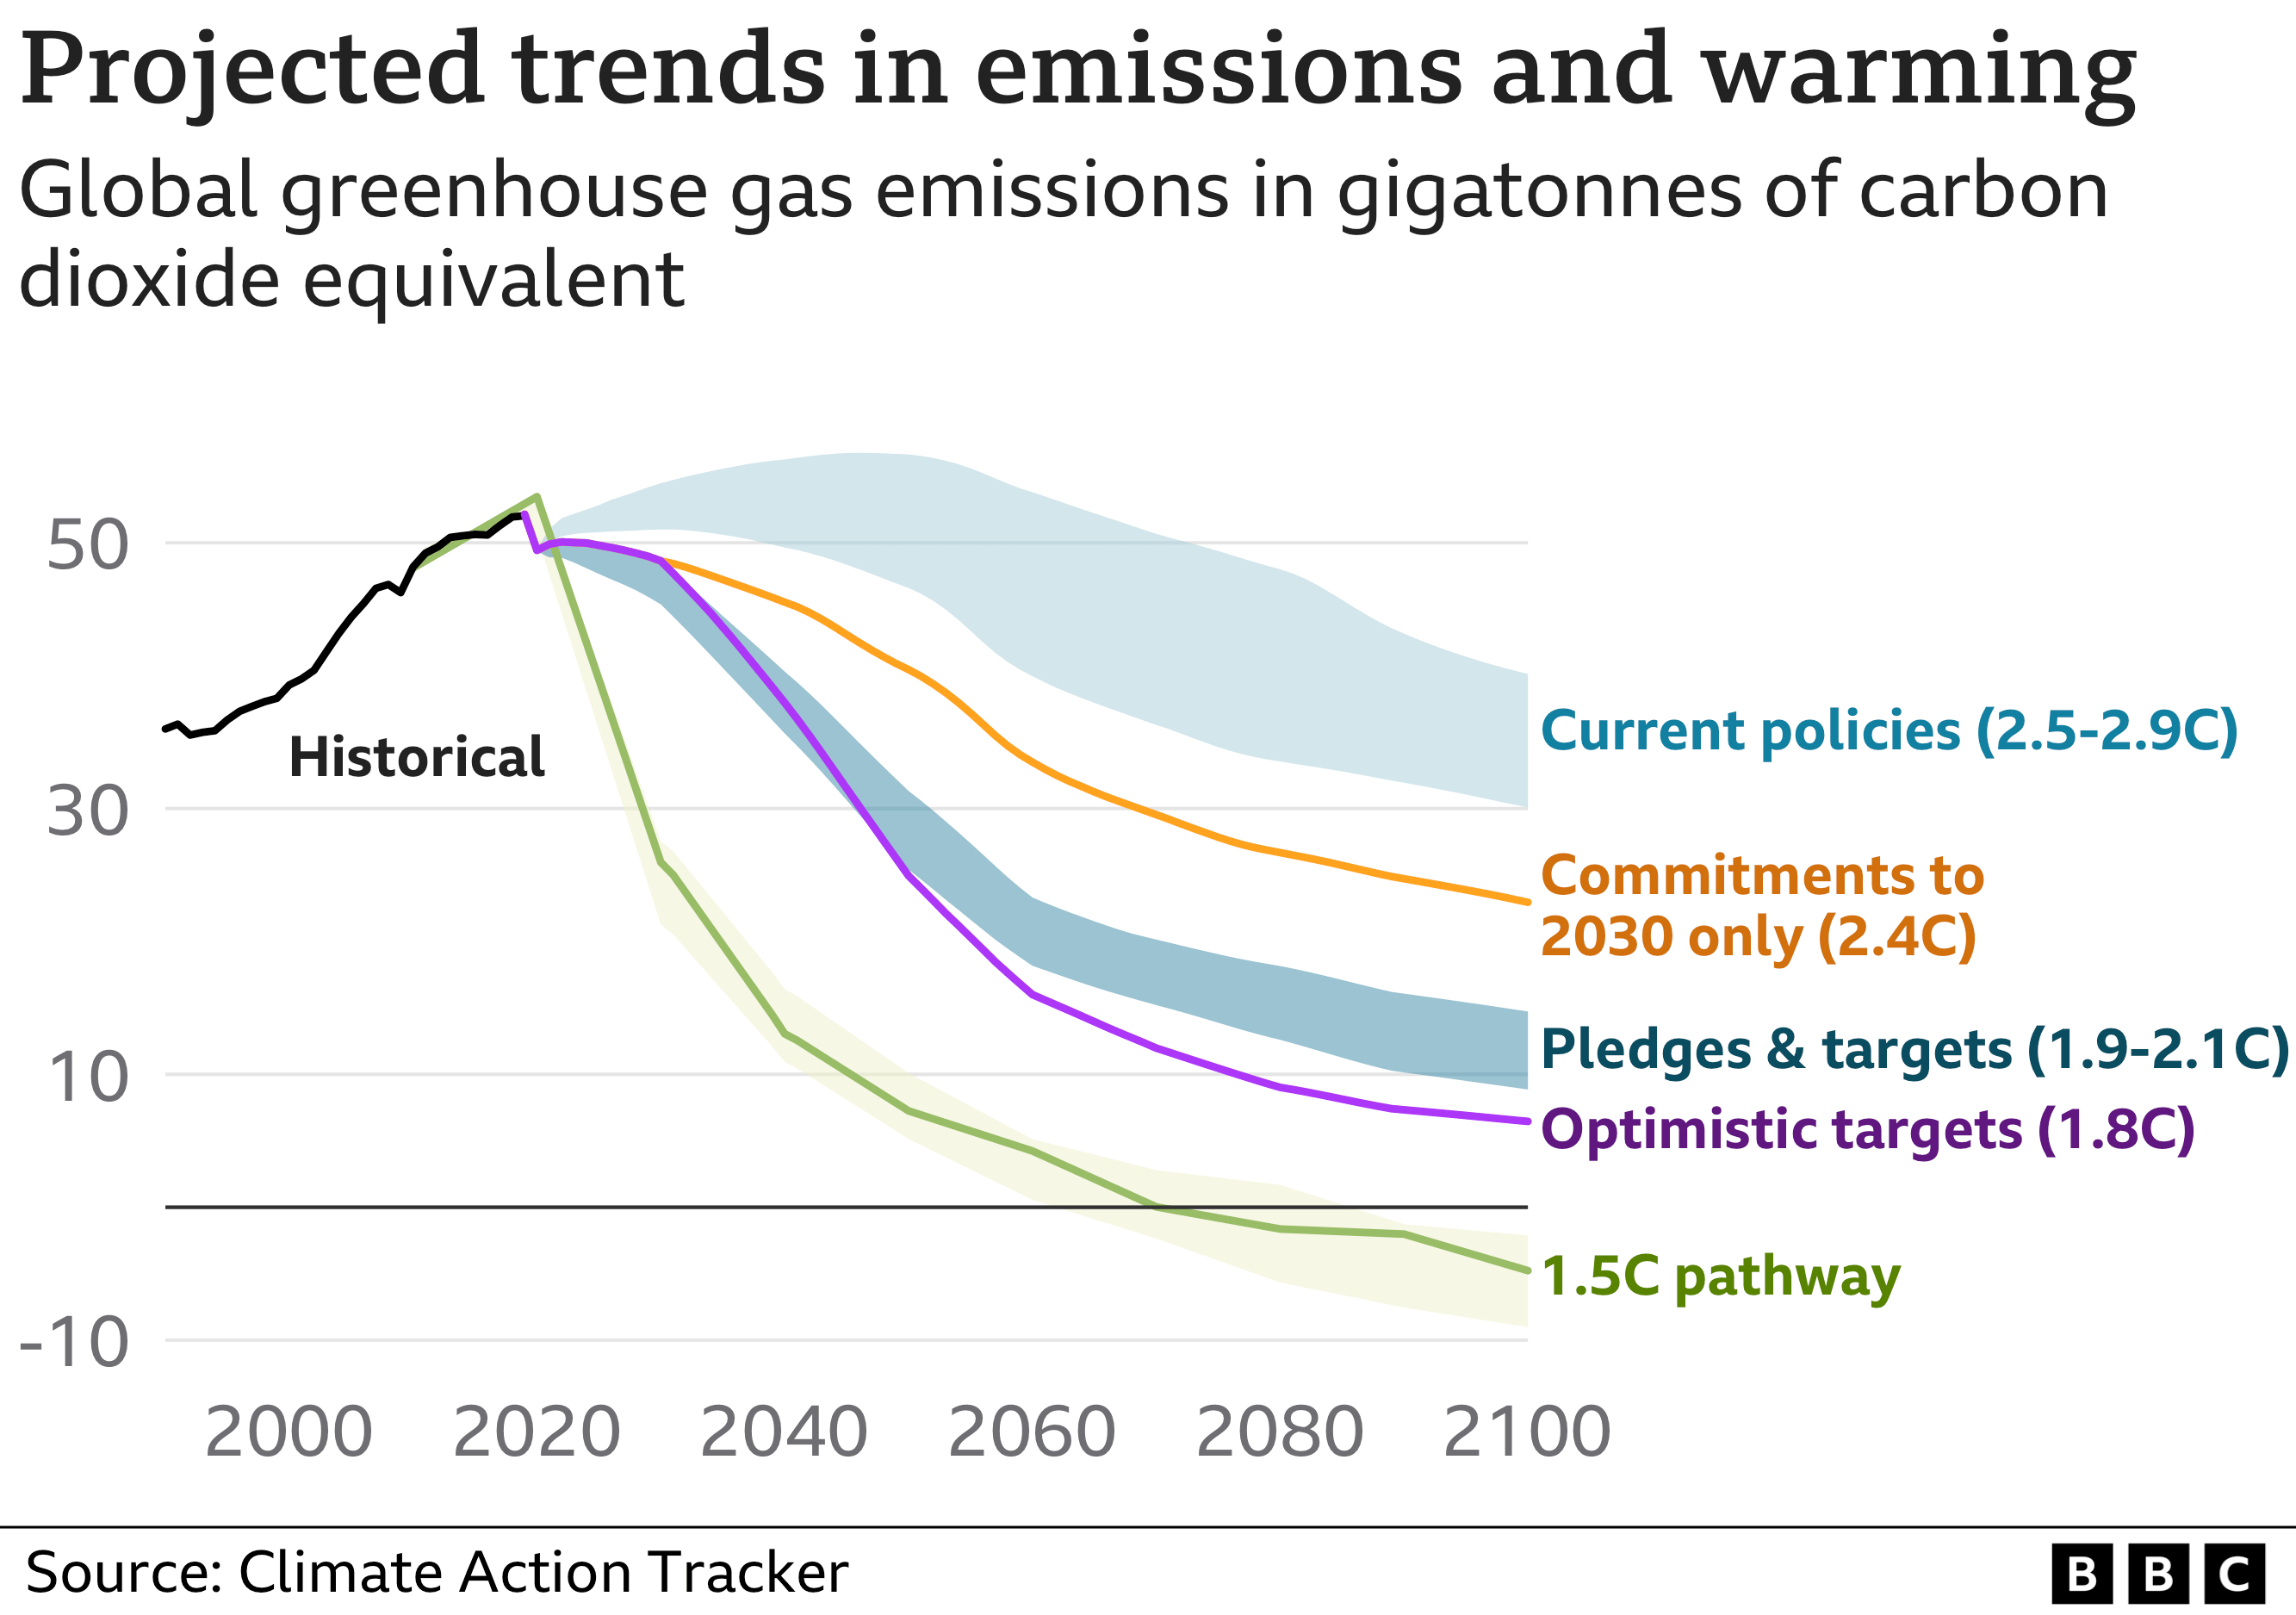 Chart showing projected trends in emissions and levels of warming. According to current policies, the world is heading for around 2.7C warming by 2100.